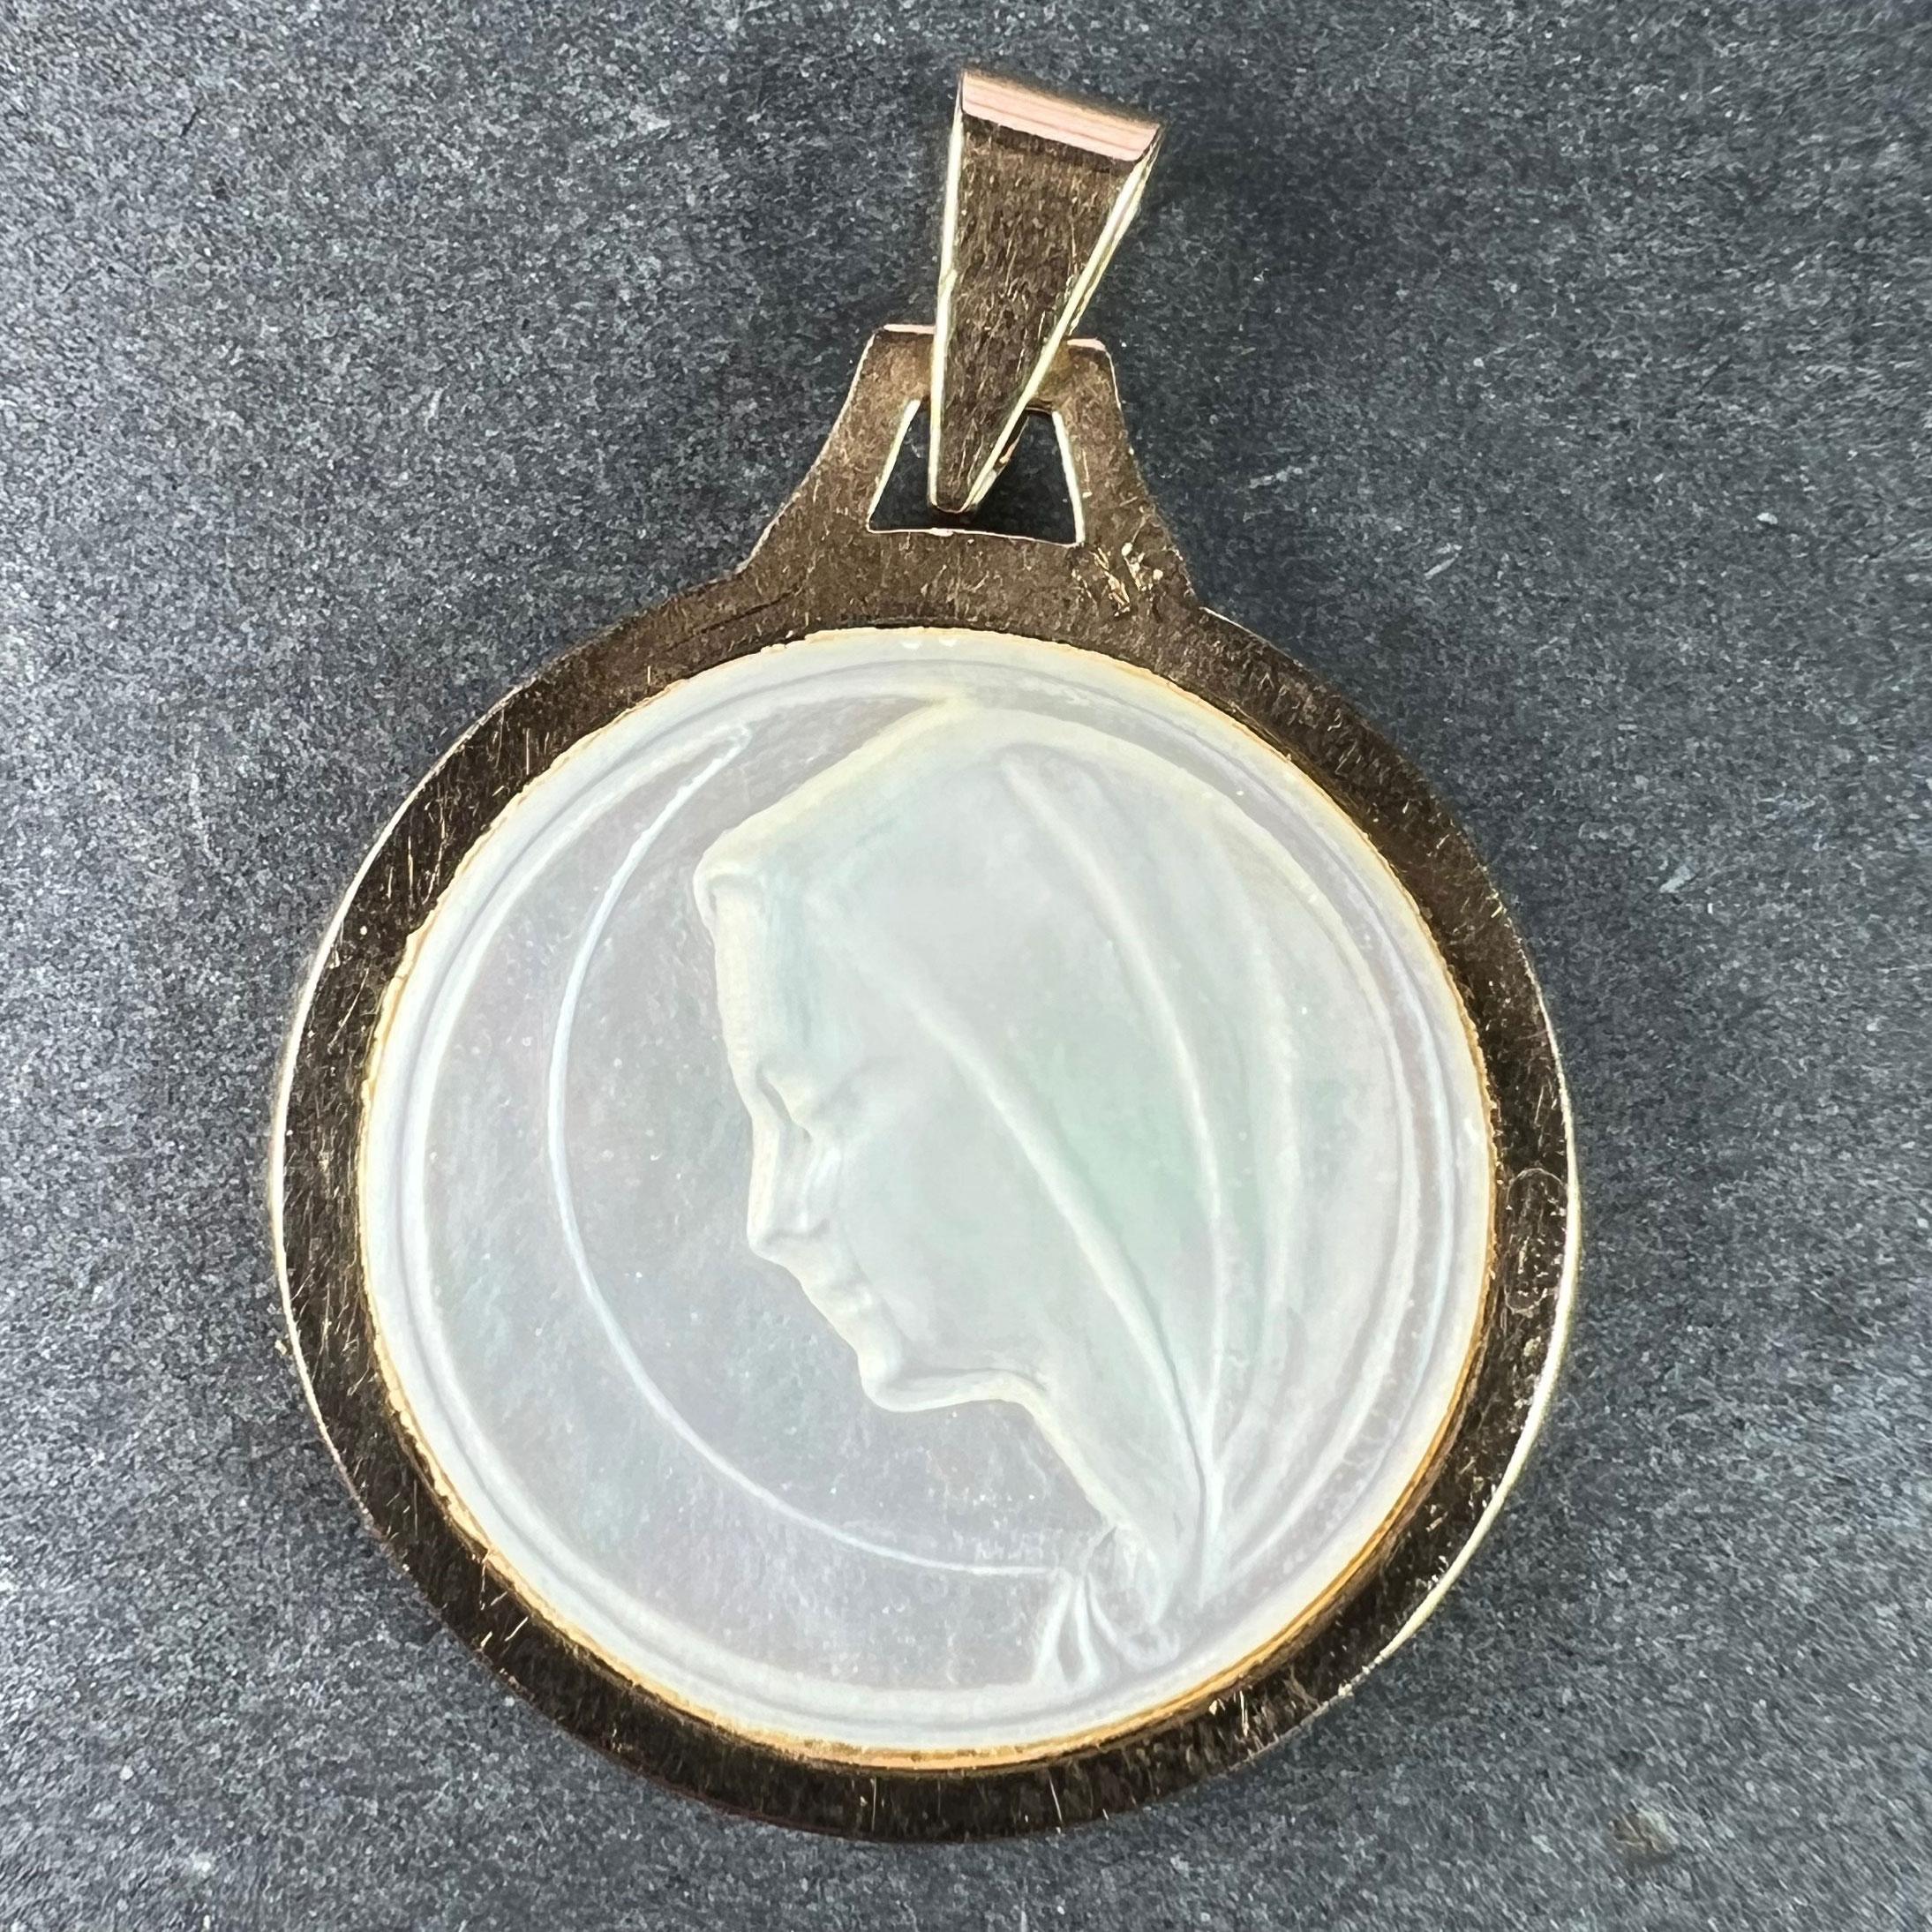 An 18 karat (18K) yellow gold charm pendant set with mother of pearl depicting the Virgin Mary in profile. Stamped with the eagle mark for 18 karat gold and French manufacture
 
Dimensions: 2.2 x 1.9 x 0.25 cm (not including jump ring)
Weight: 1.93